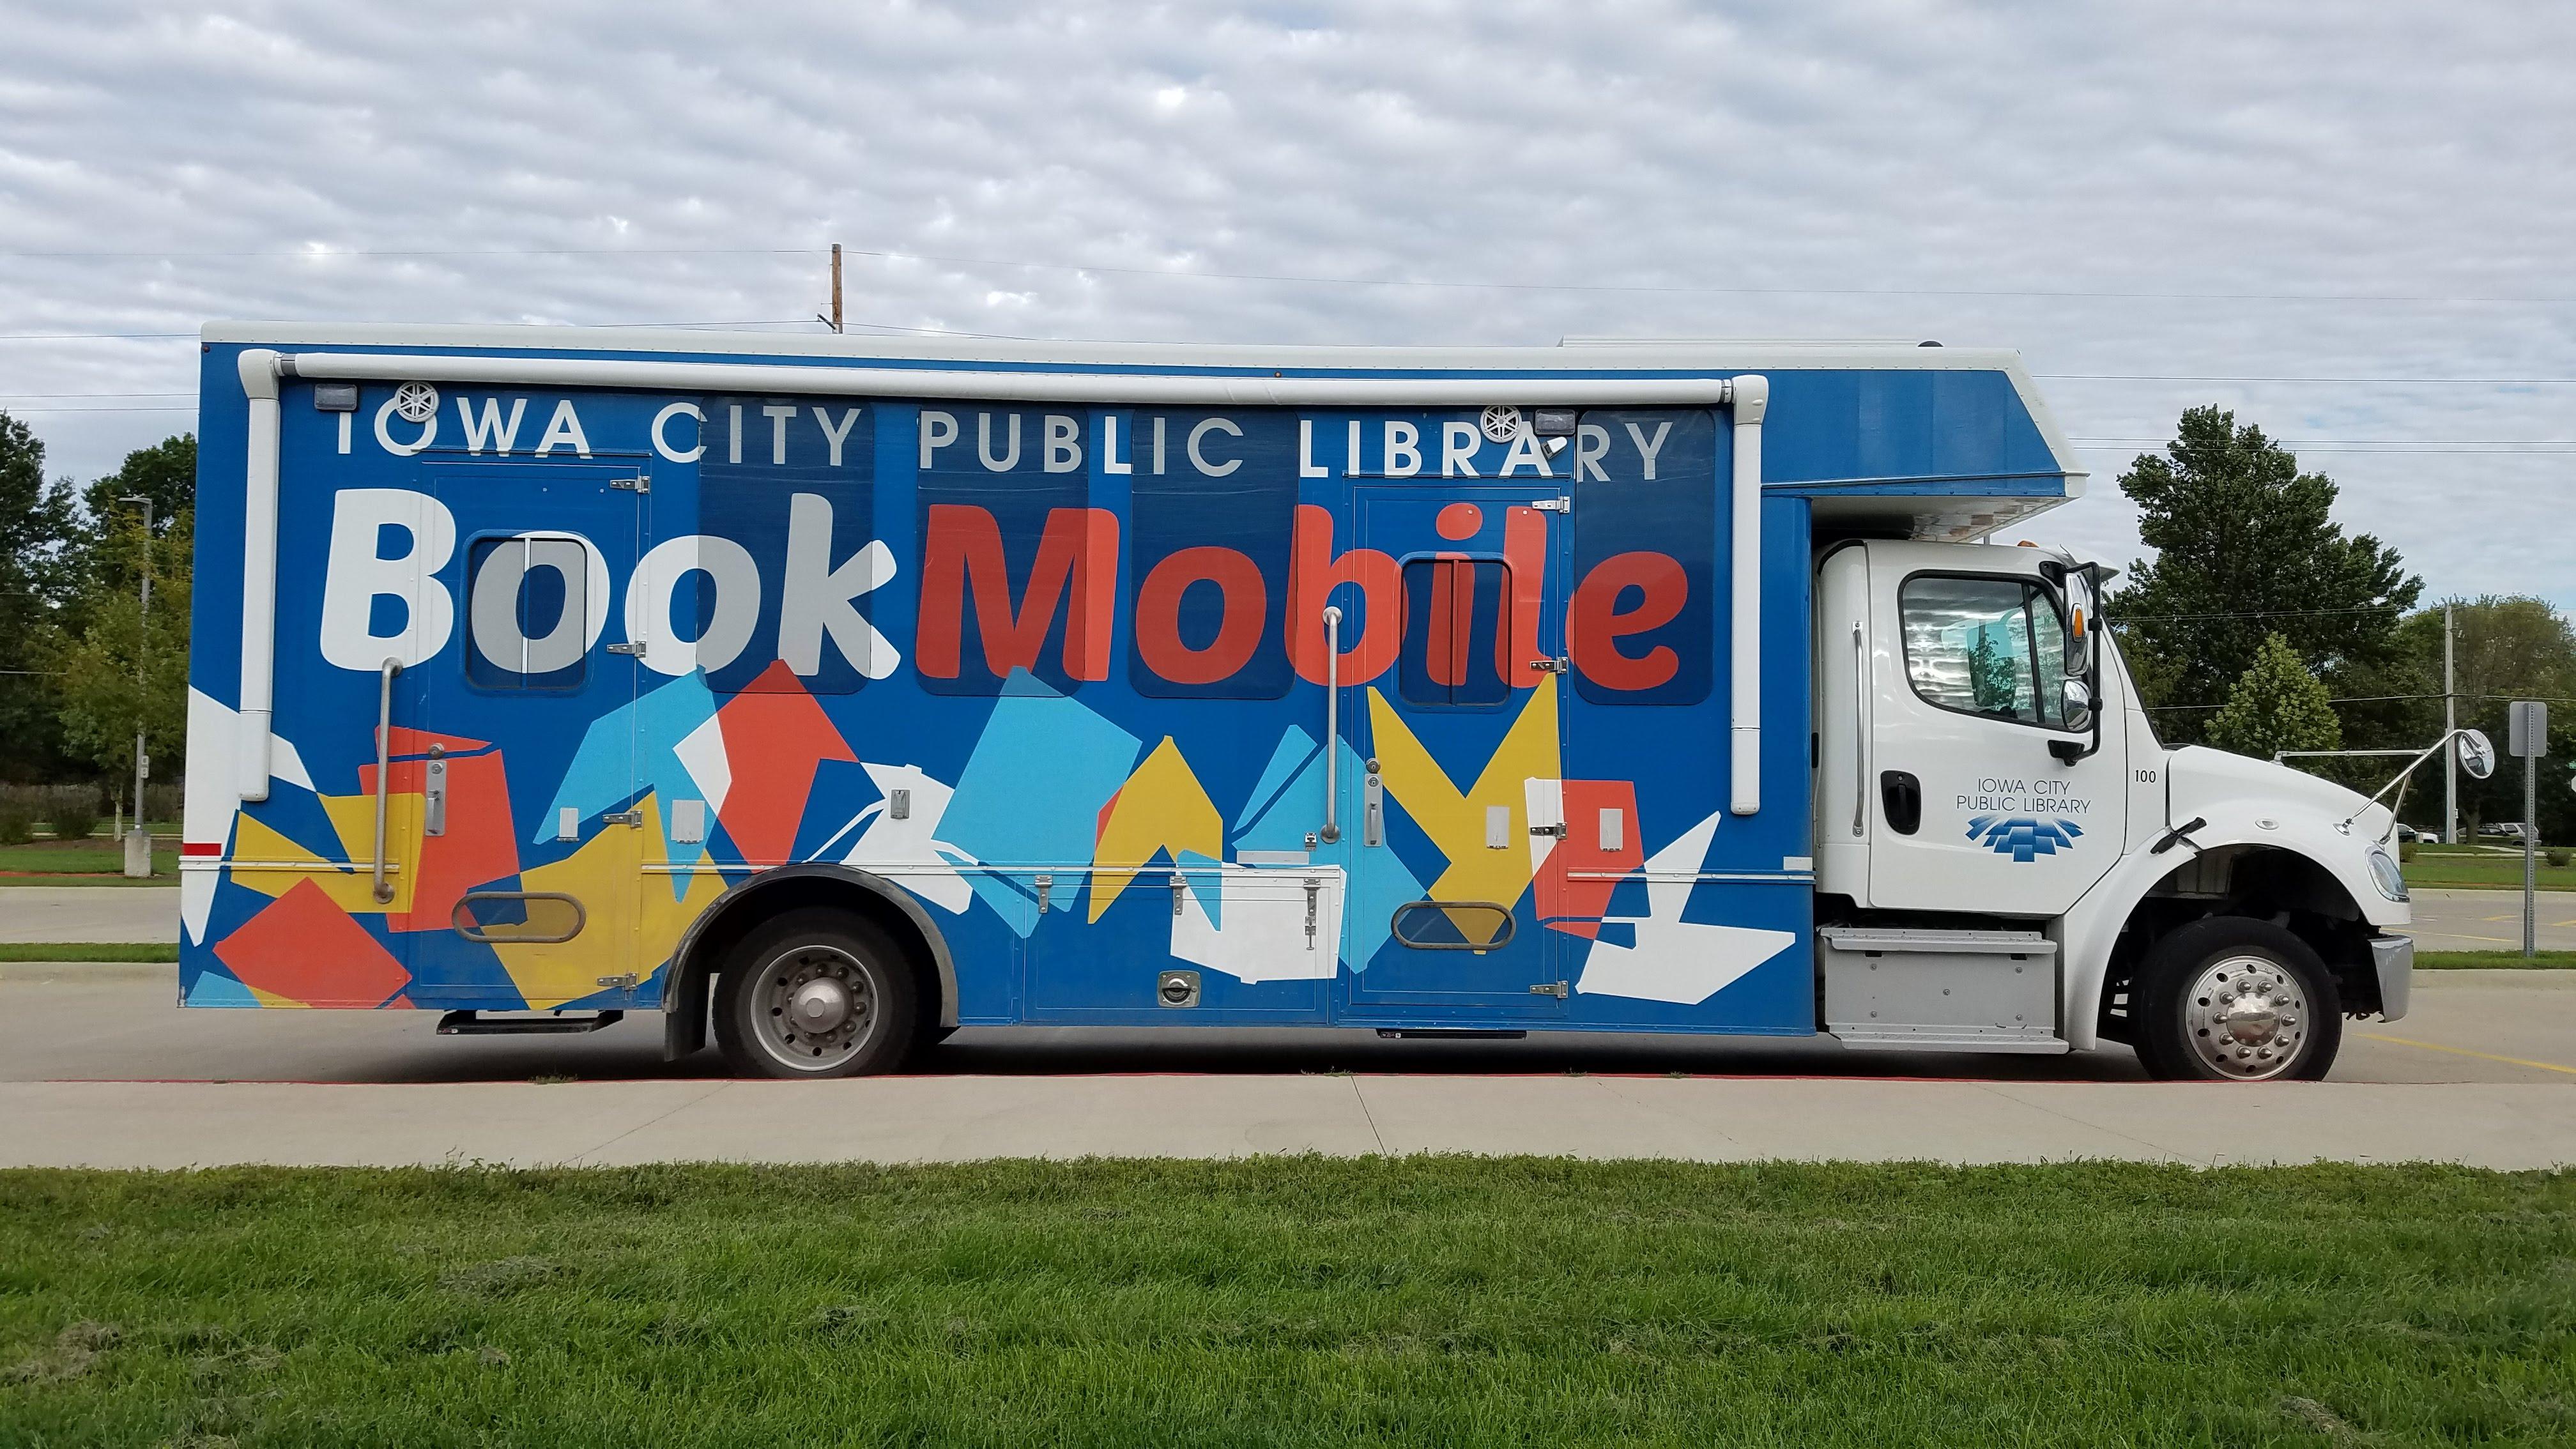 ICPL Bookmobile vehicle parked alongside green grass with cloudy sky.